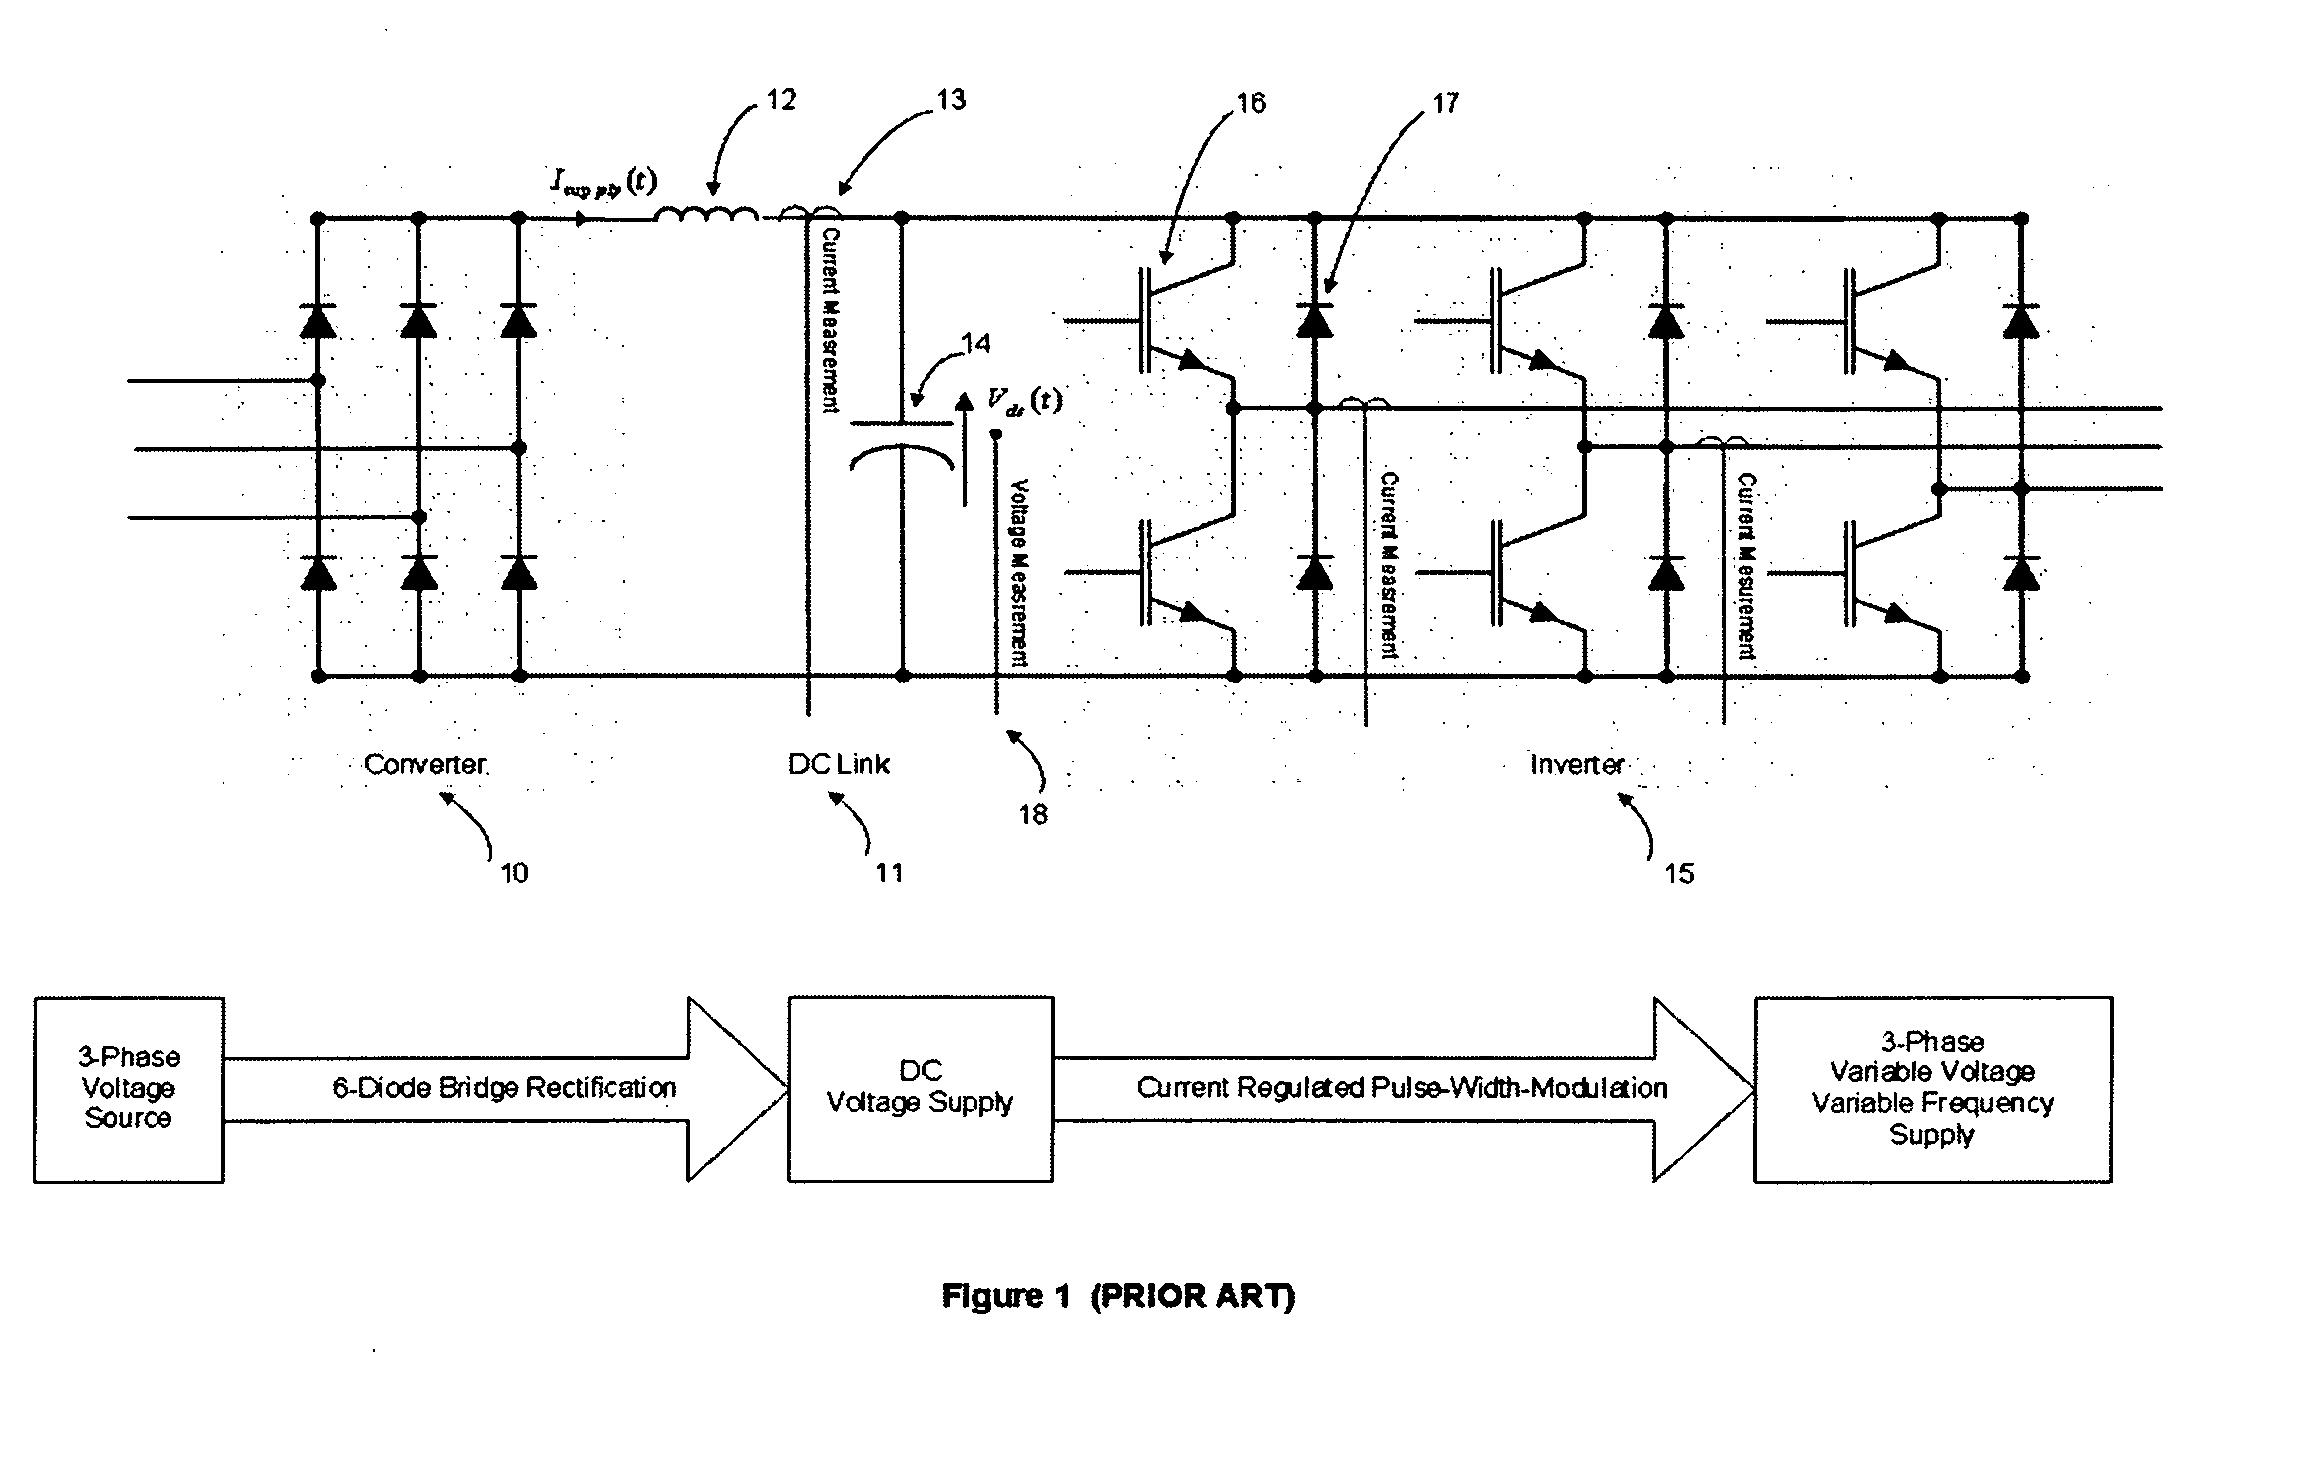 Energy management apparatus and method for injection molding systems